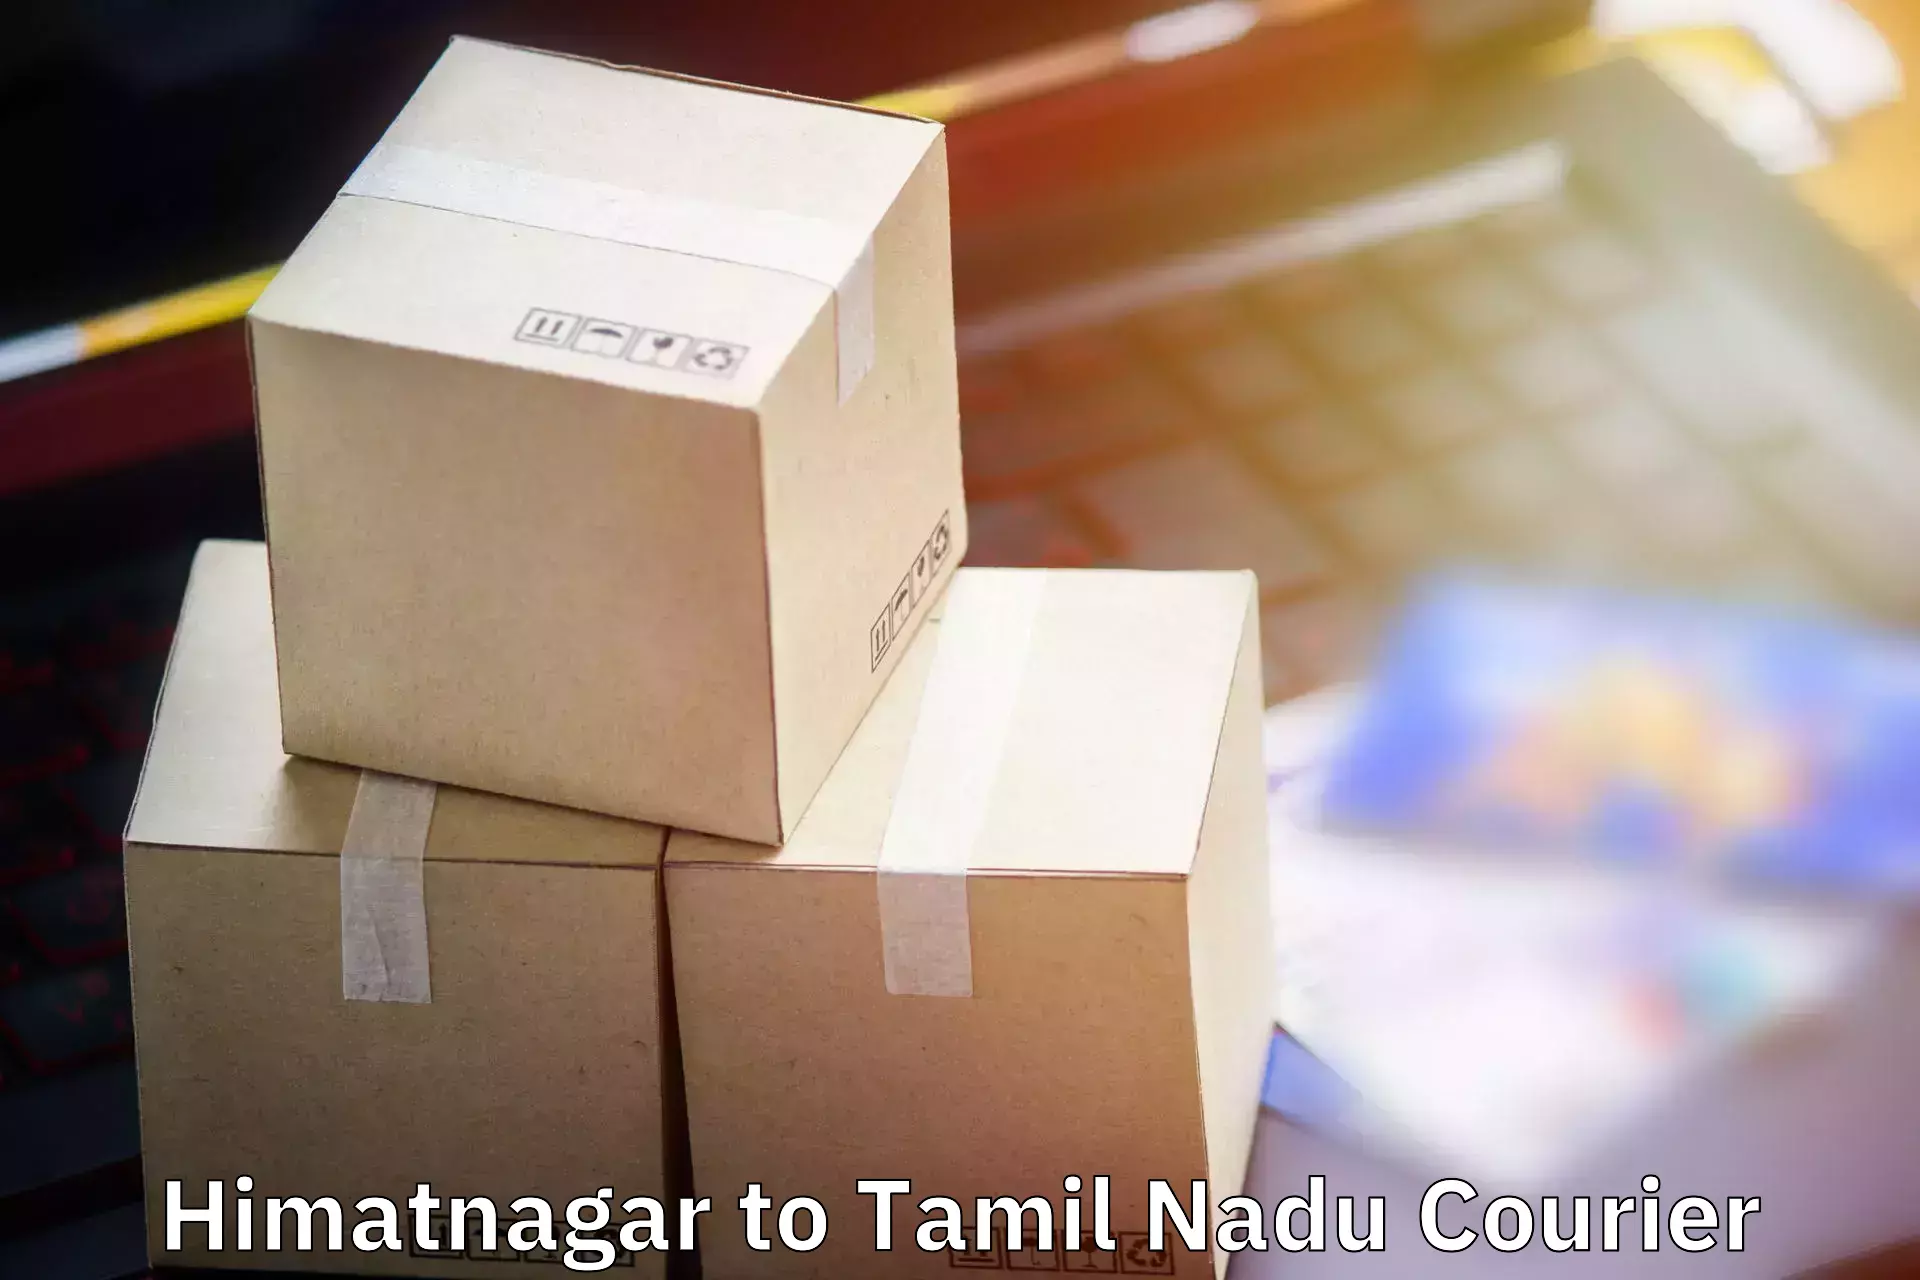 Luggage shipping specialists Himatnagar to Melur